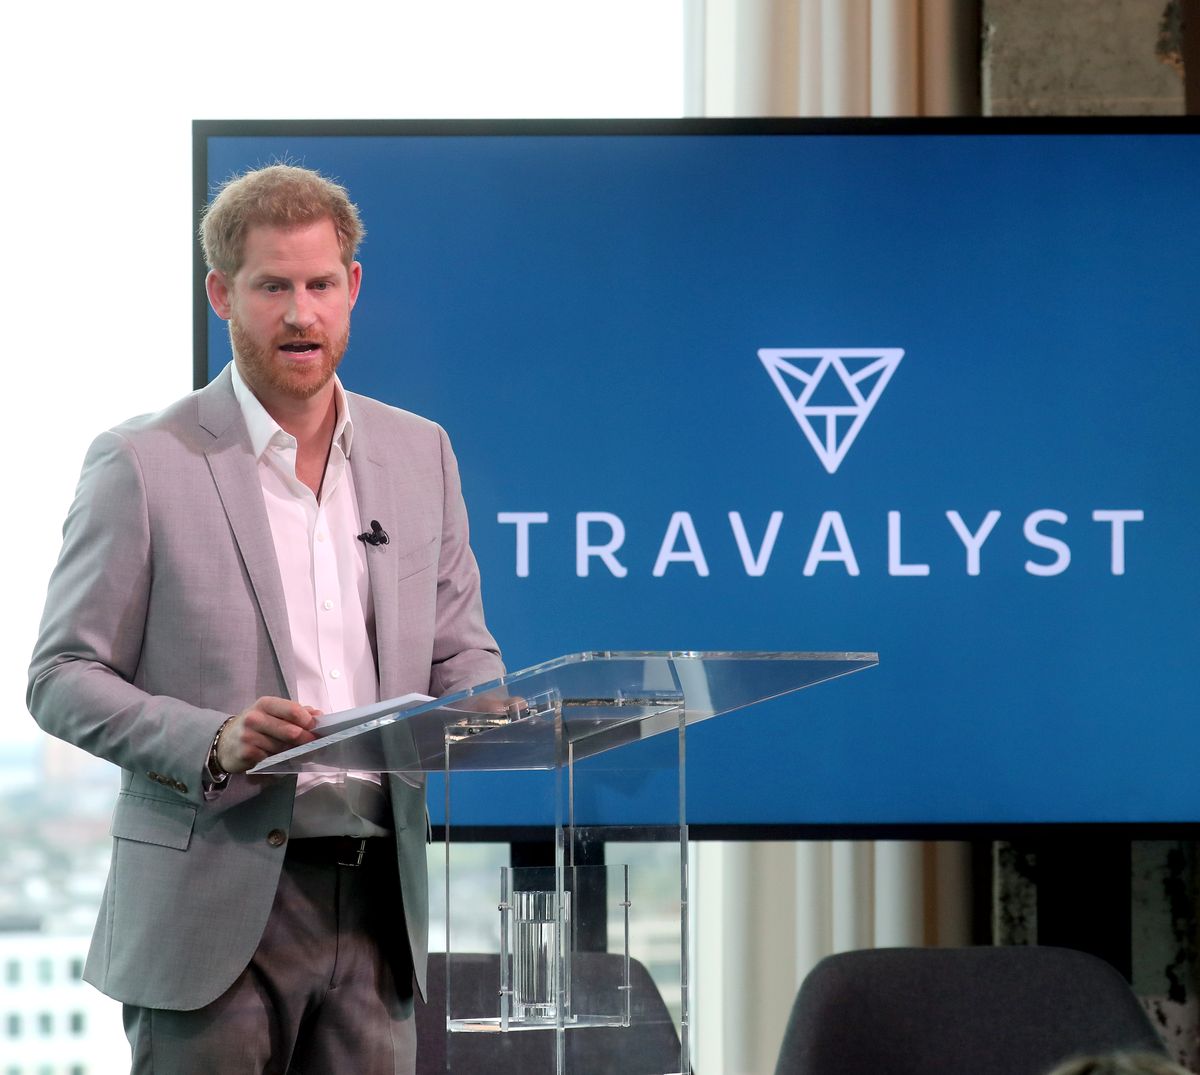 The Duke Of Sussex Launches New Partnership In Amsterdam